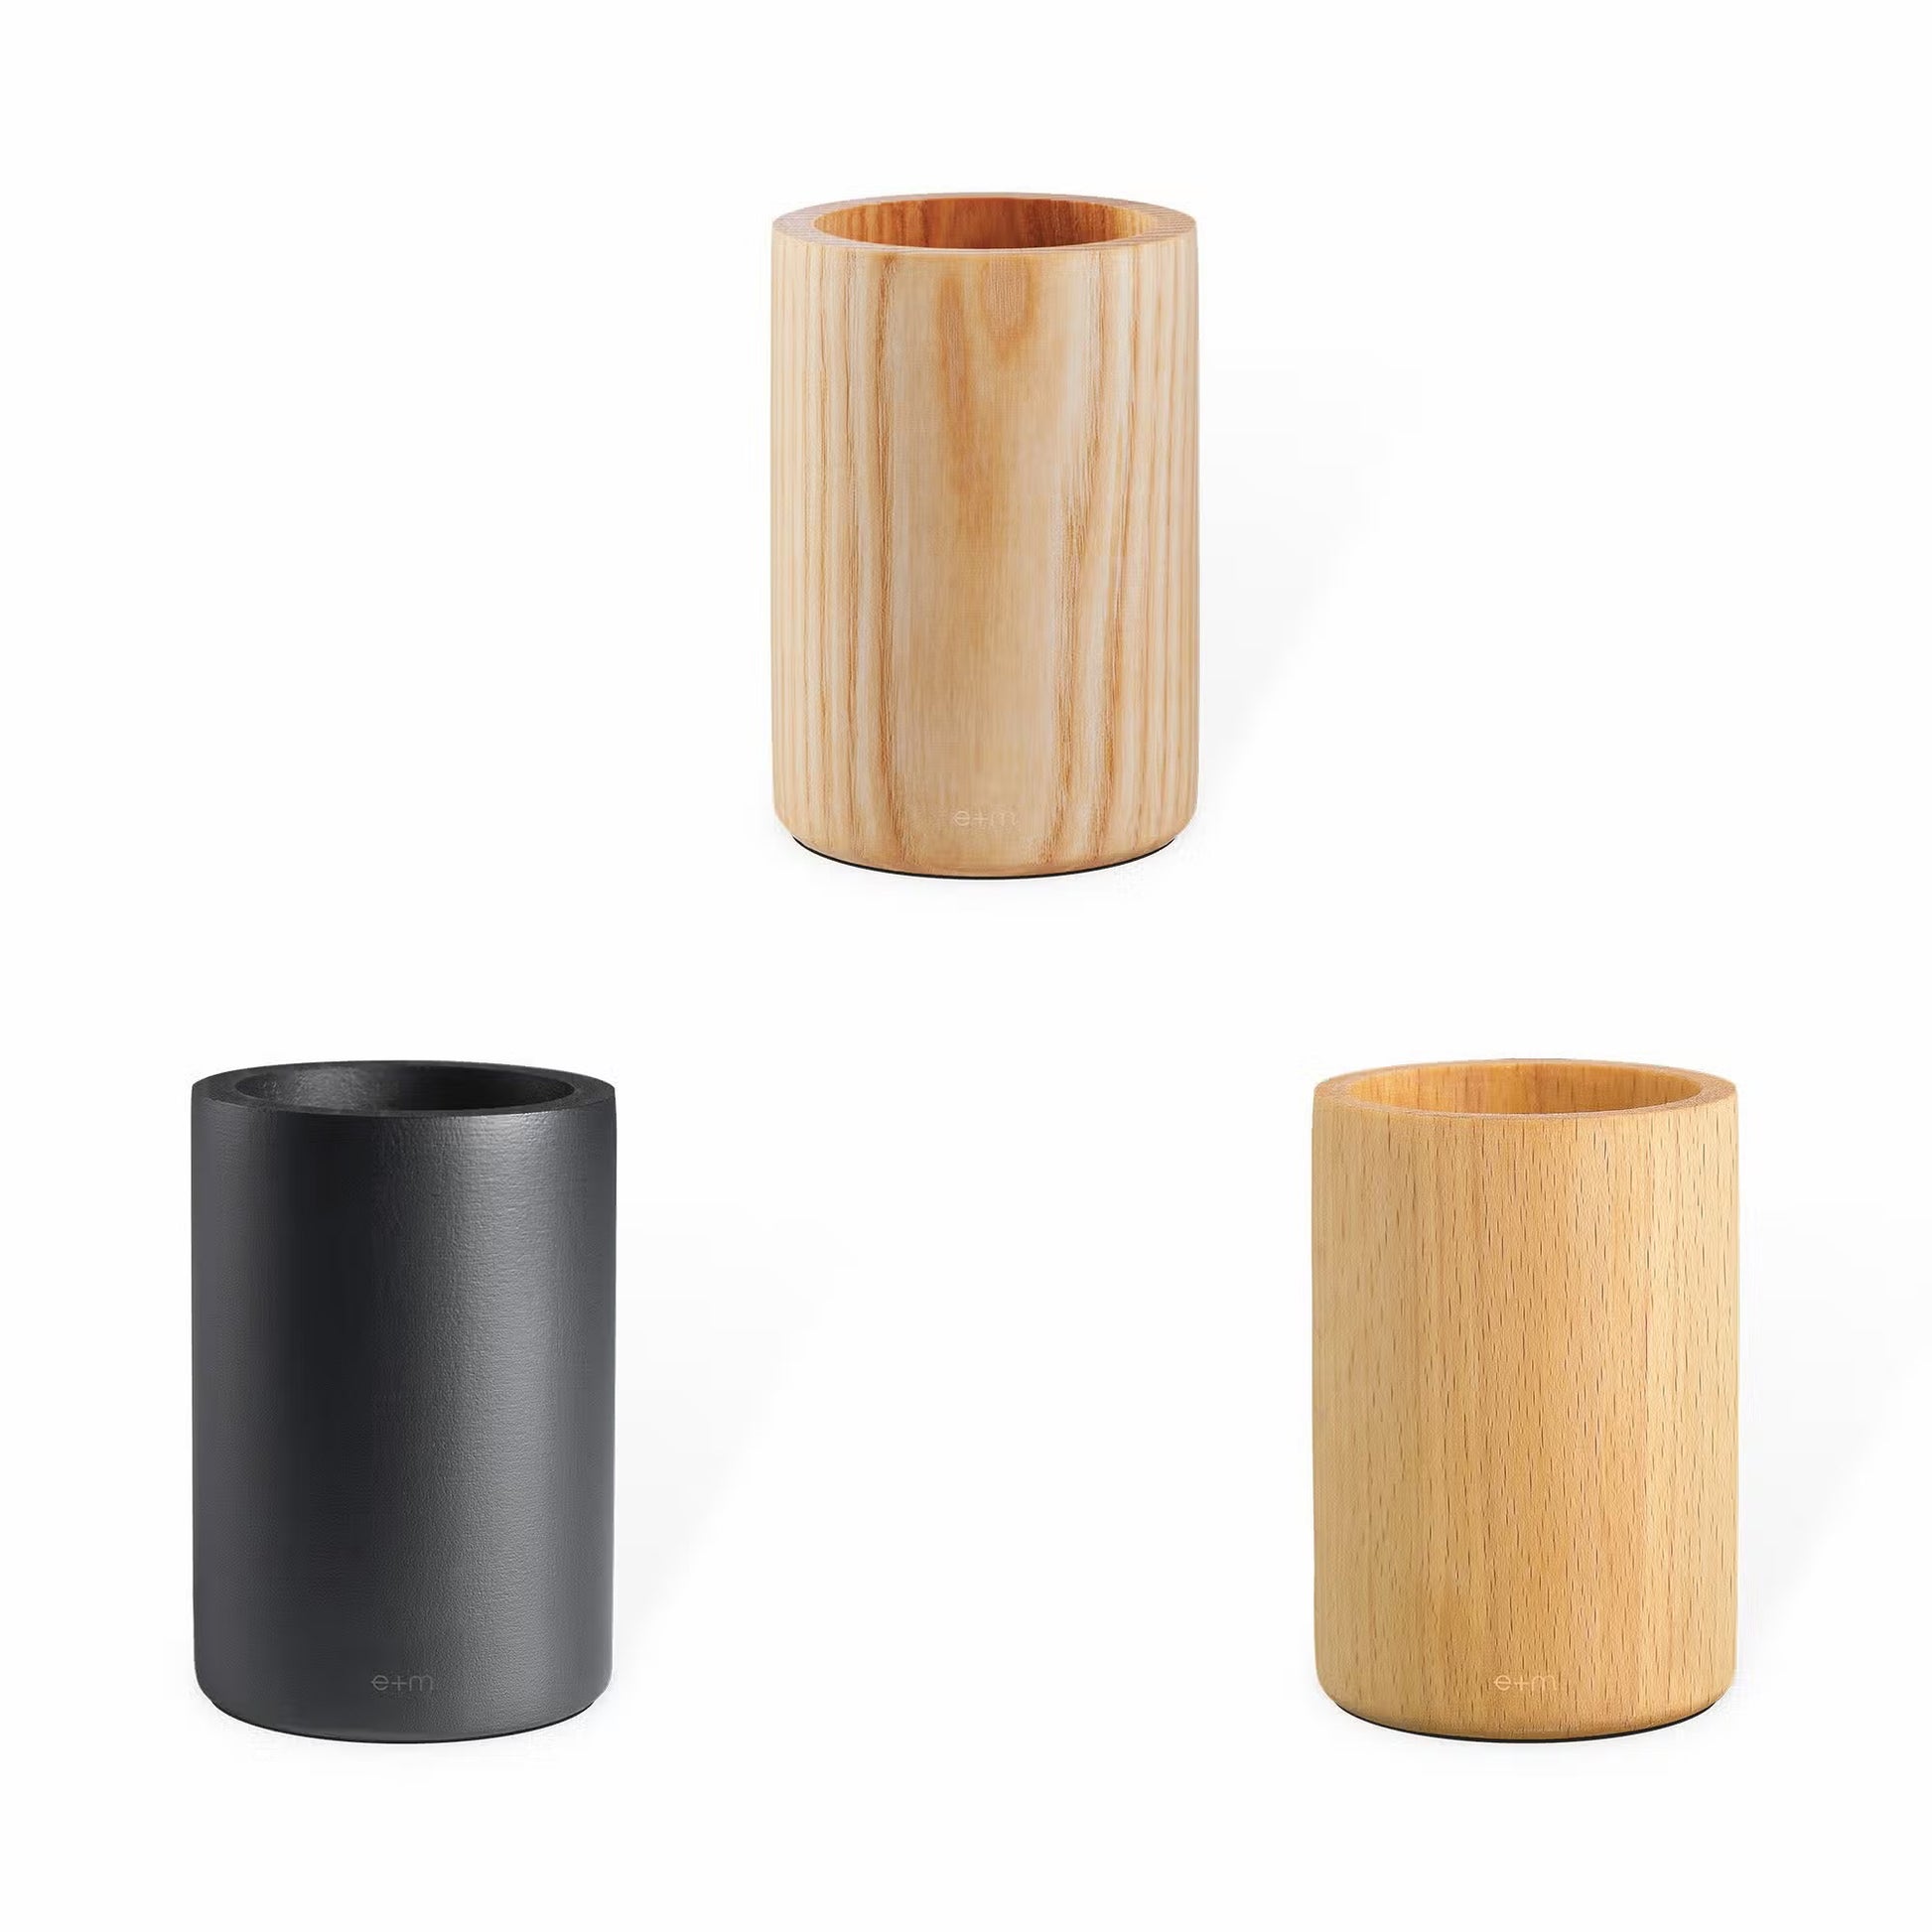 E+M Potbelly Beech, black, Ash Pen Cups Made in Germany Solid Wood